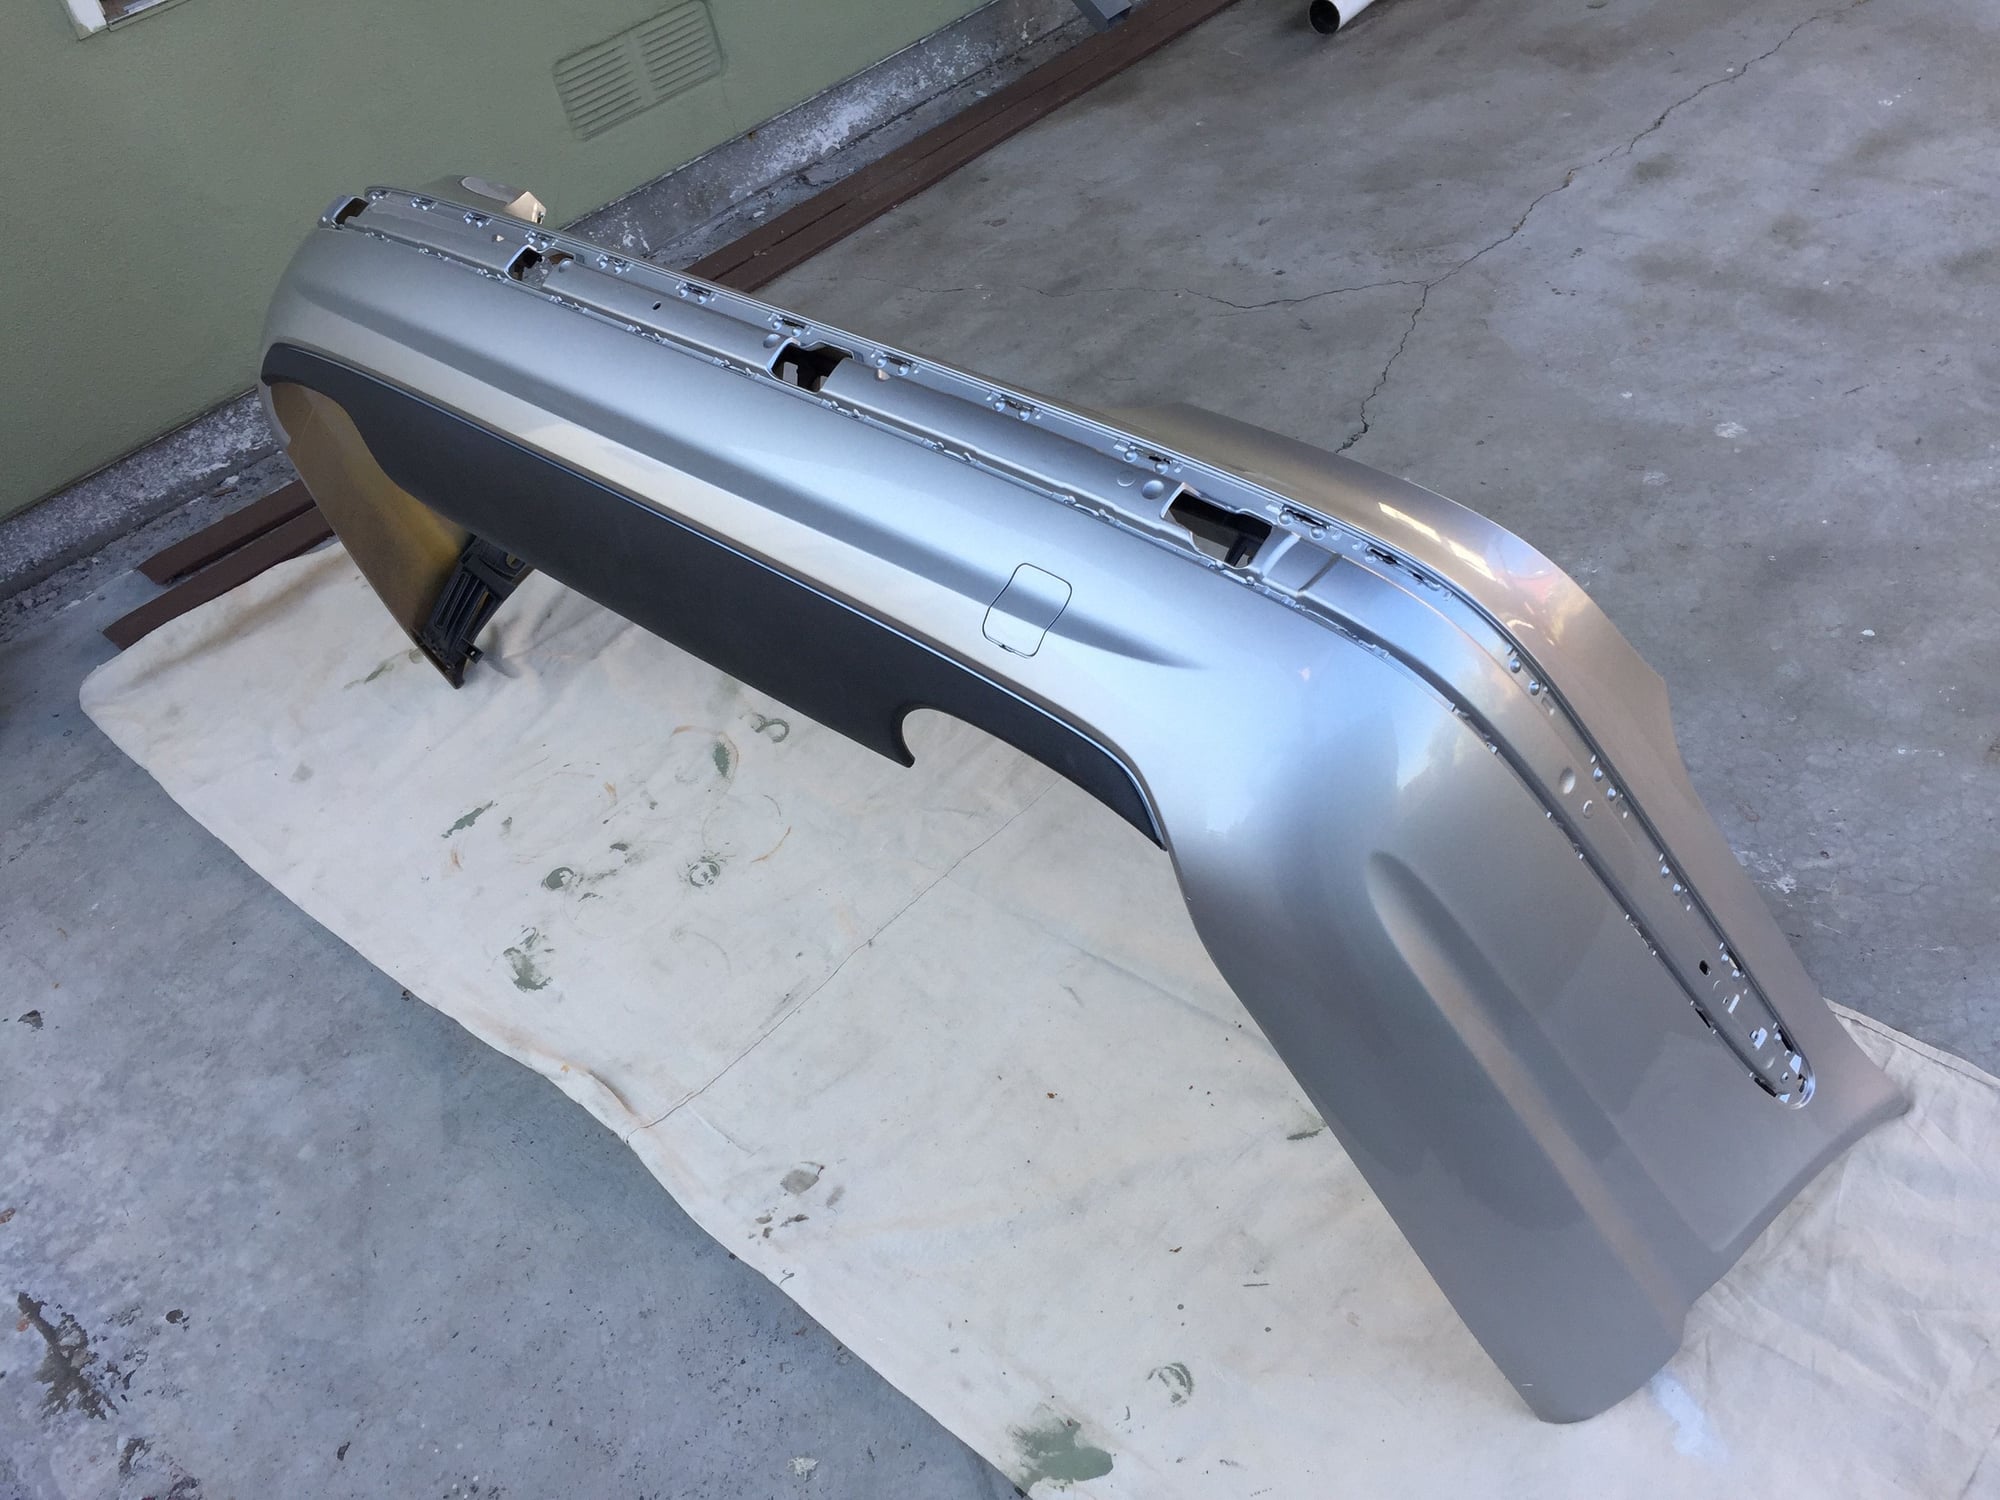 Exterior Body Parts - 2003 - 2006 e55 OEM Front, Rear, side skirts, spoiler for sale - $2000 - Used - 2003 to 2006 Mercedes-Benz E55 AMG - Oakland, CA 94619, United States